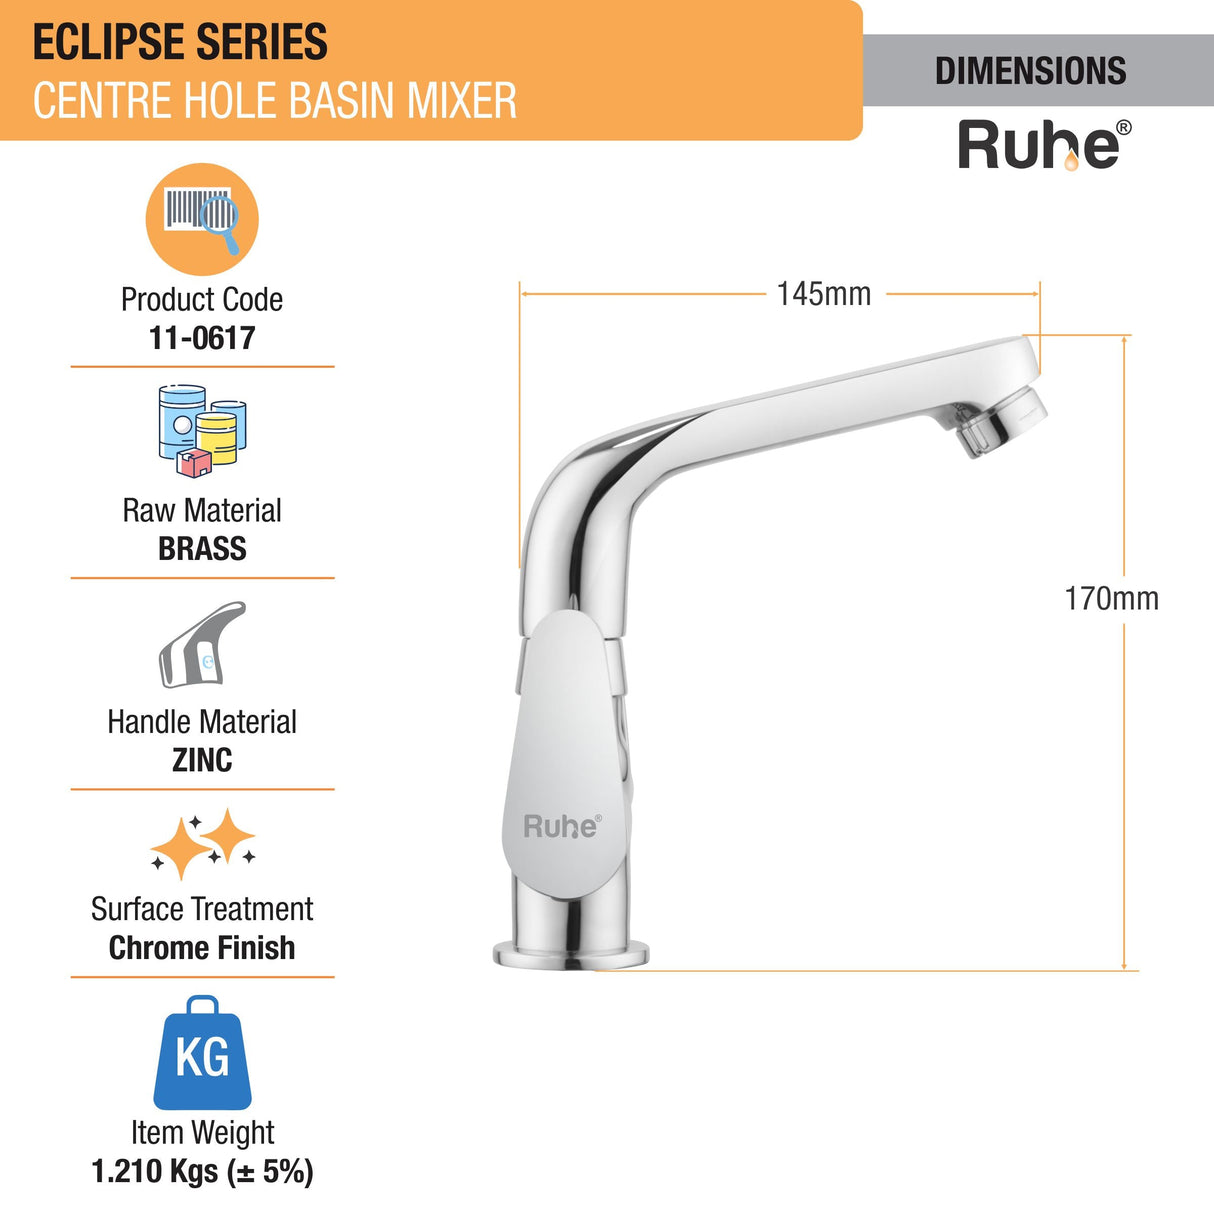 Eclipse Centre Hole Basin Mixer with Small (7 inches) Swivel Spout Faucet dimensions and size